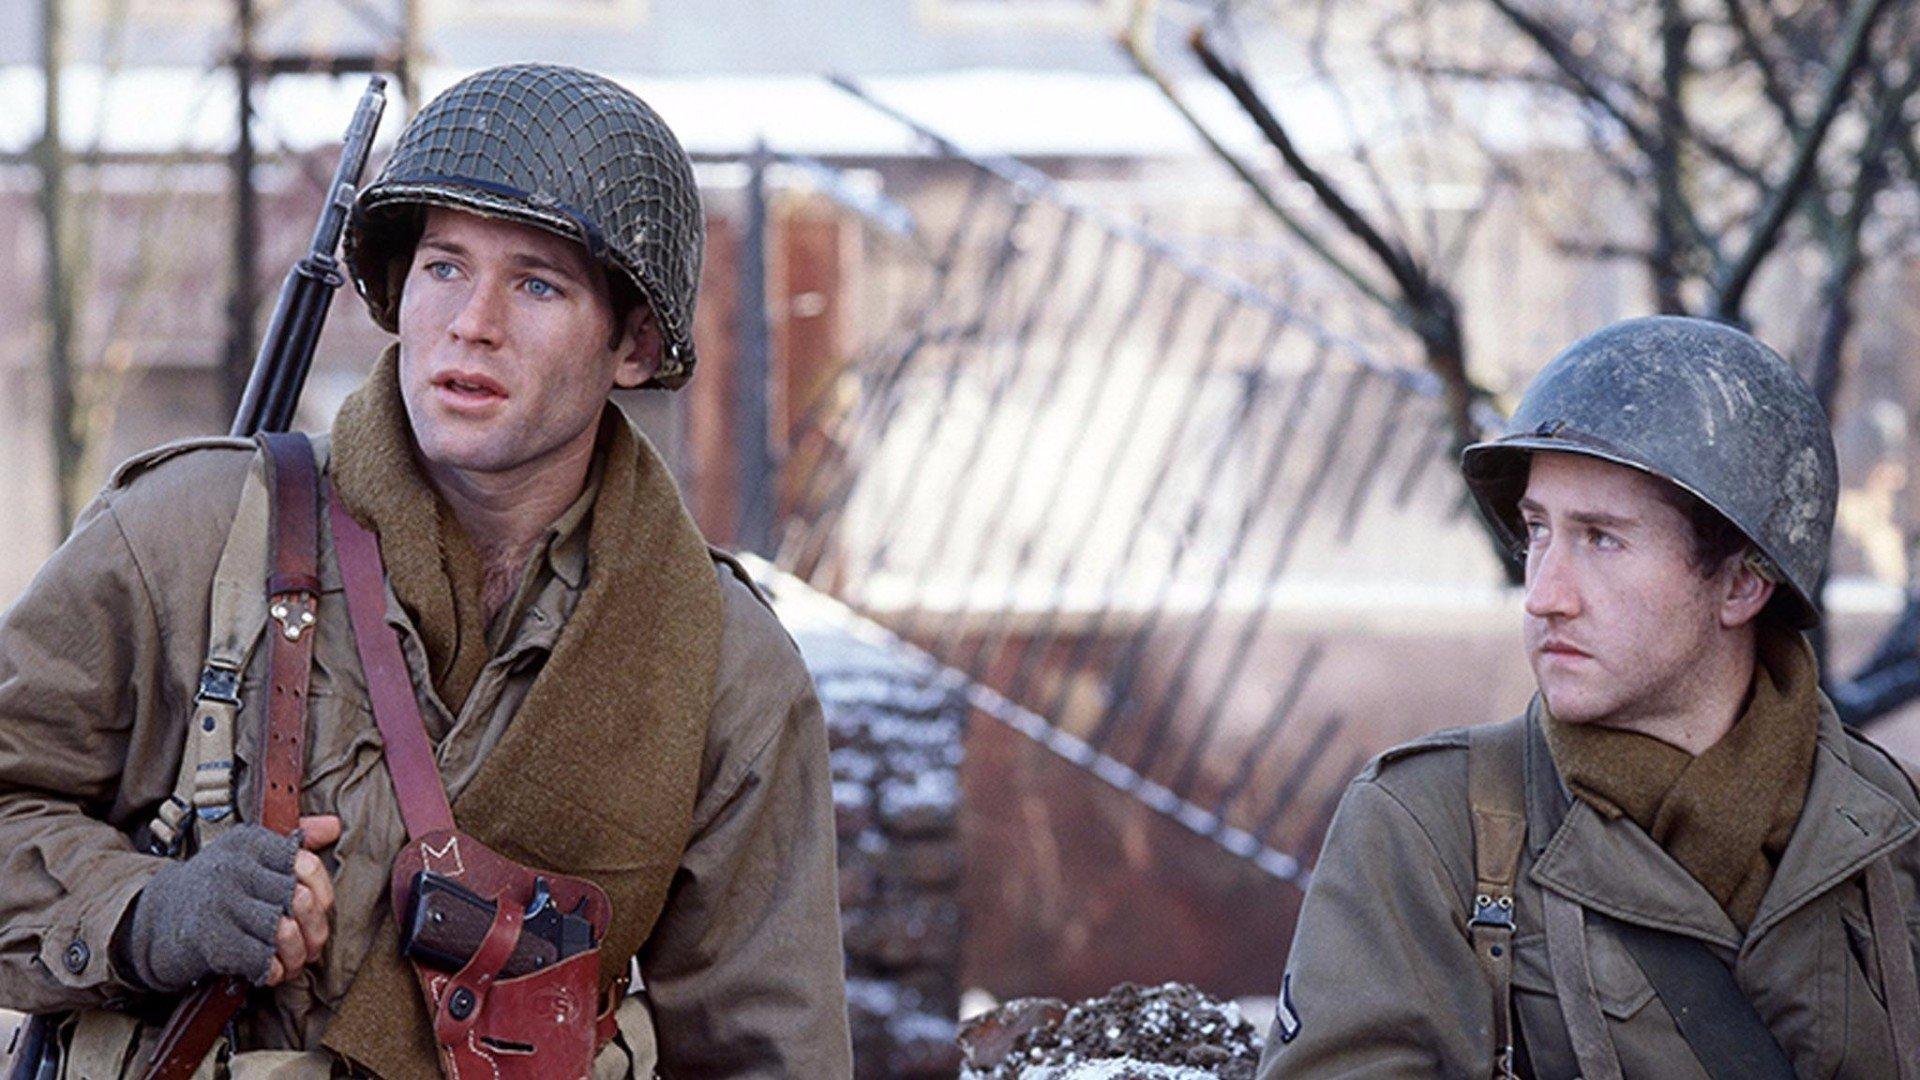 S1 Ep8 - Band of Brothers